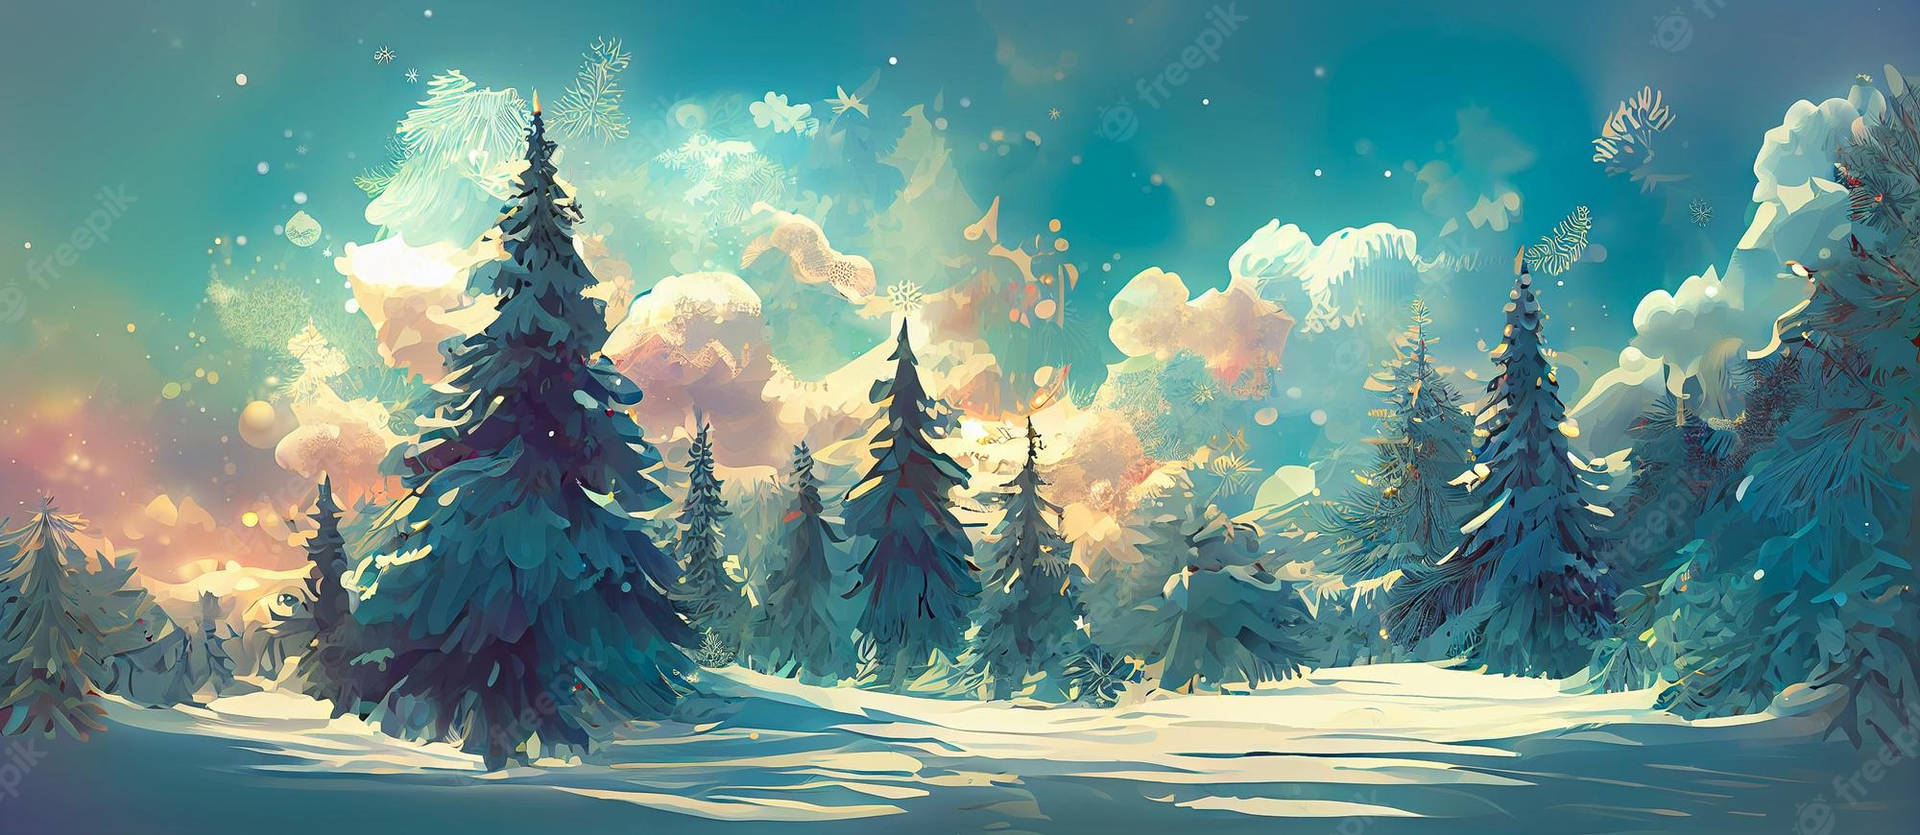 Celebrate the Holiday Season in a Magical Christmas Forest Wallpaper